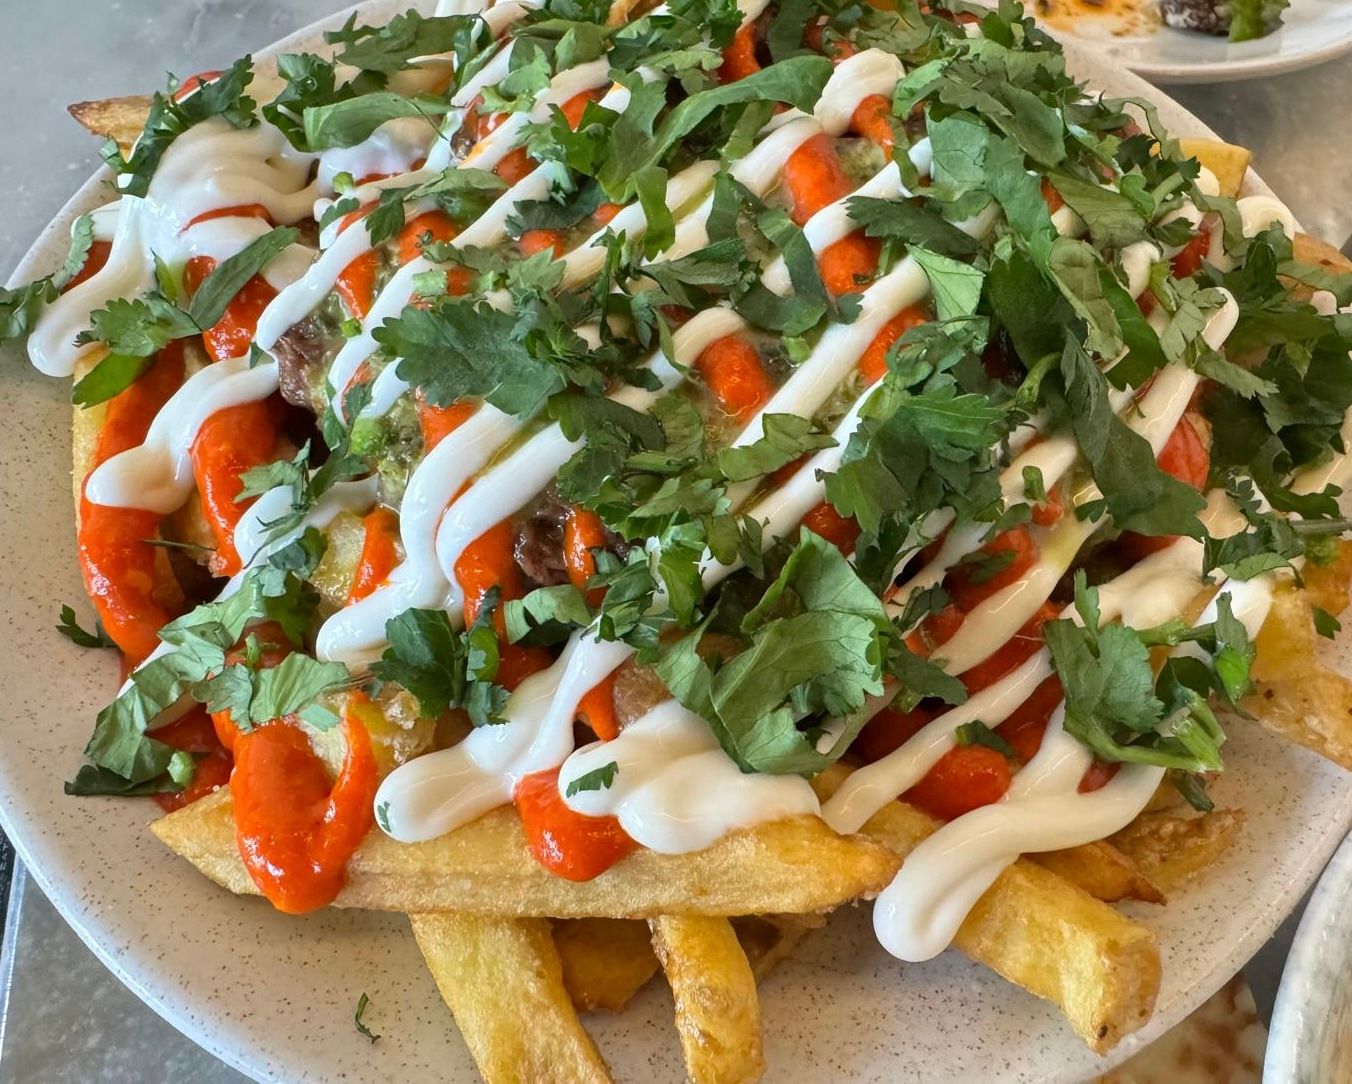 Le Bab’s loaded fries